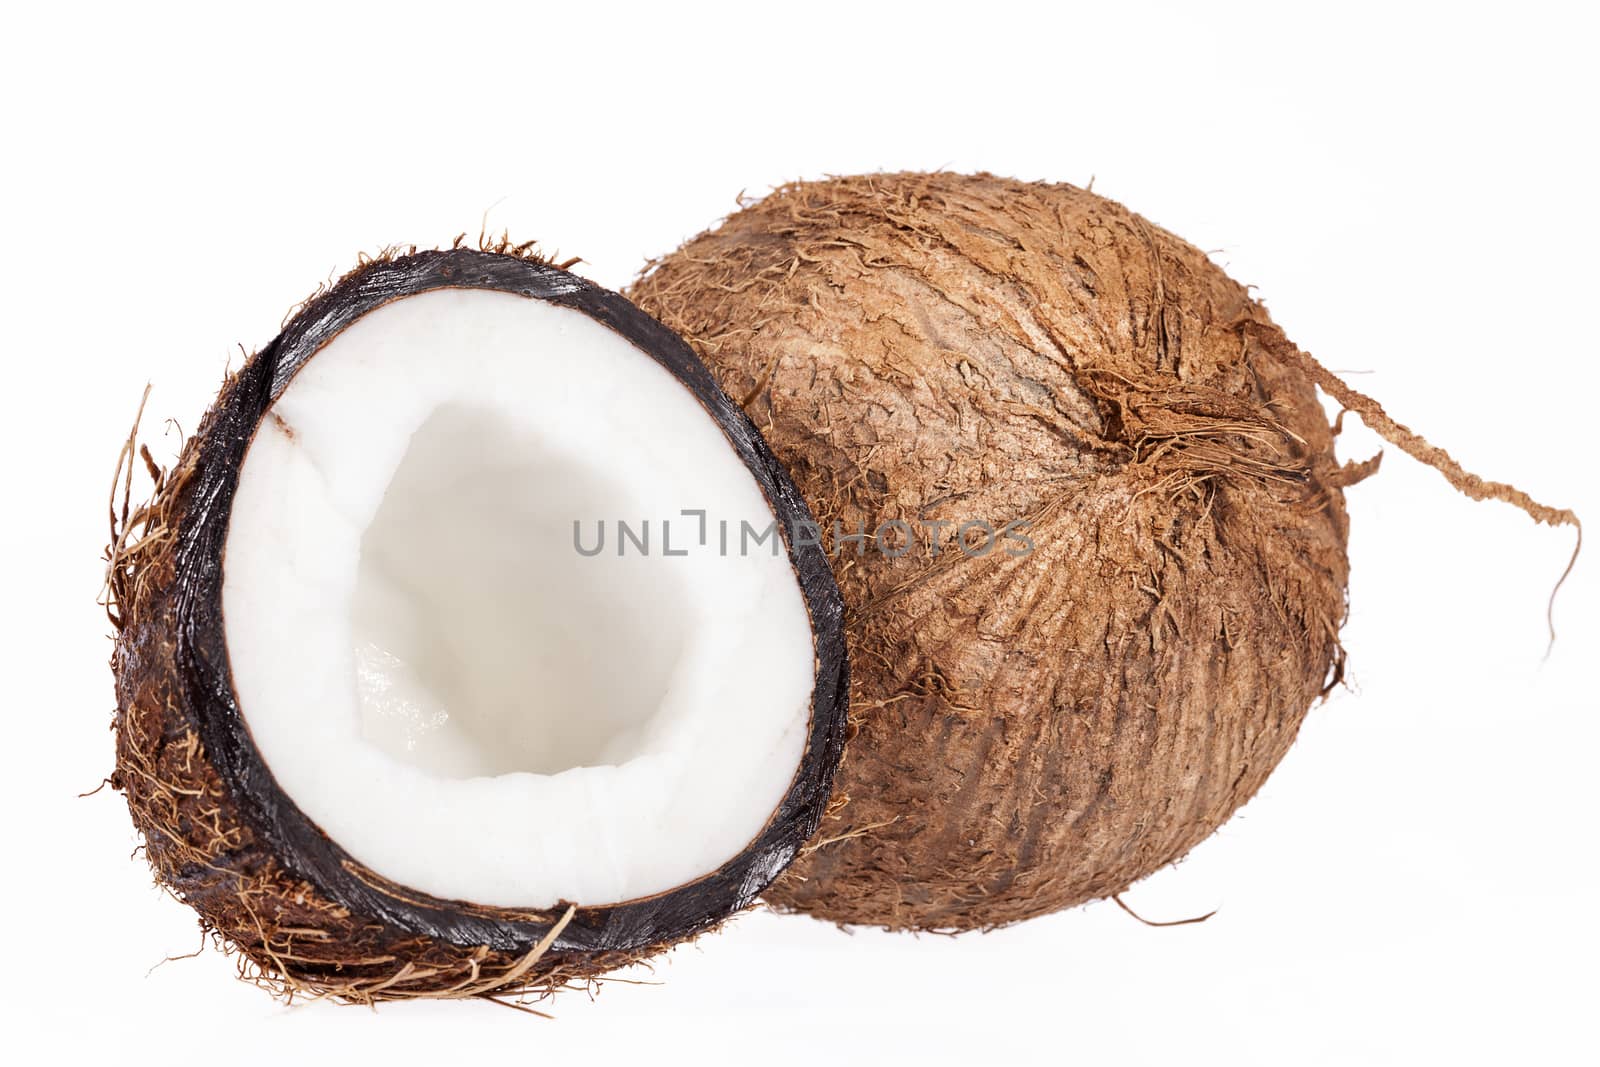 Fruits of coconut isolated on white background, close up by mychadre77